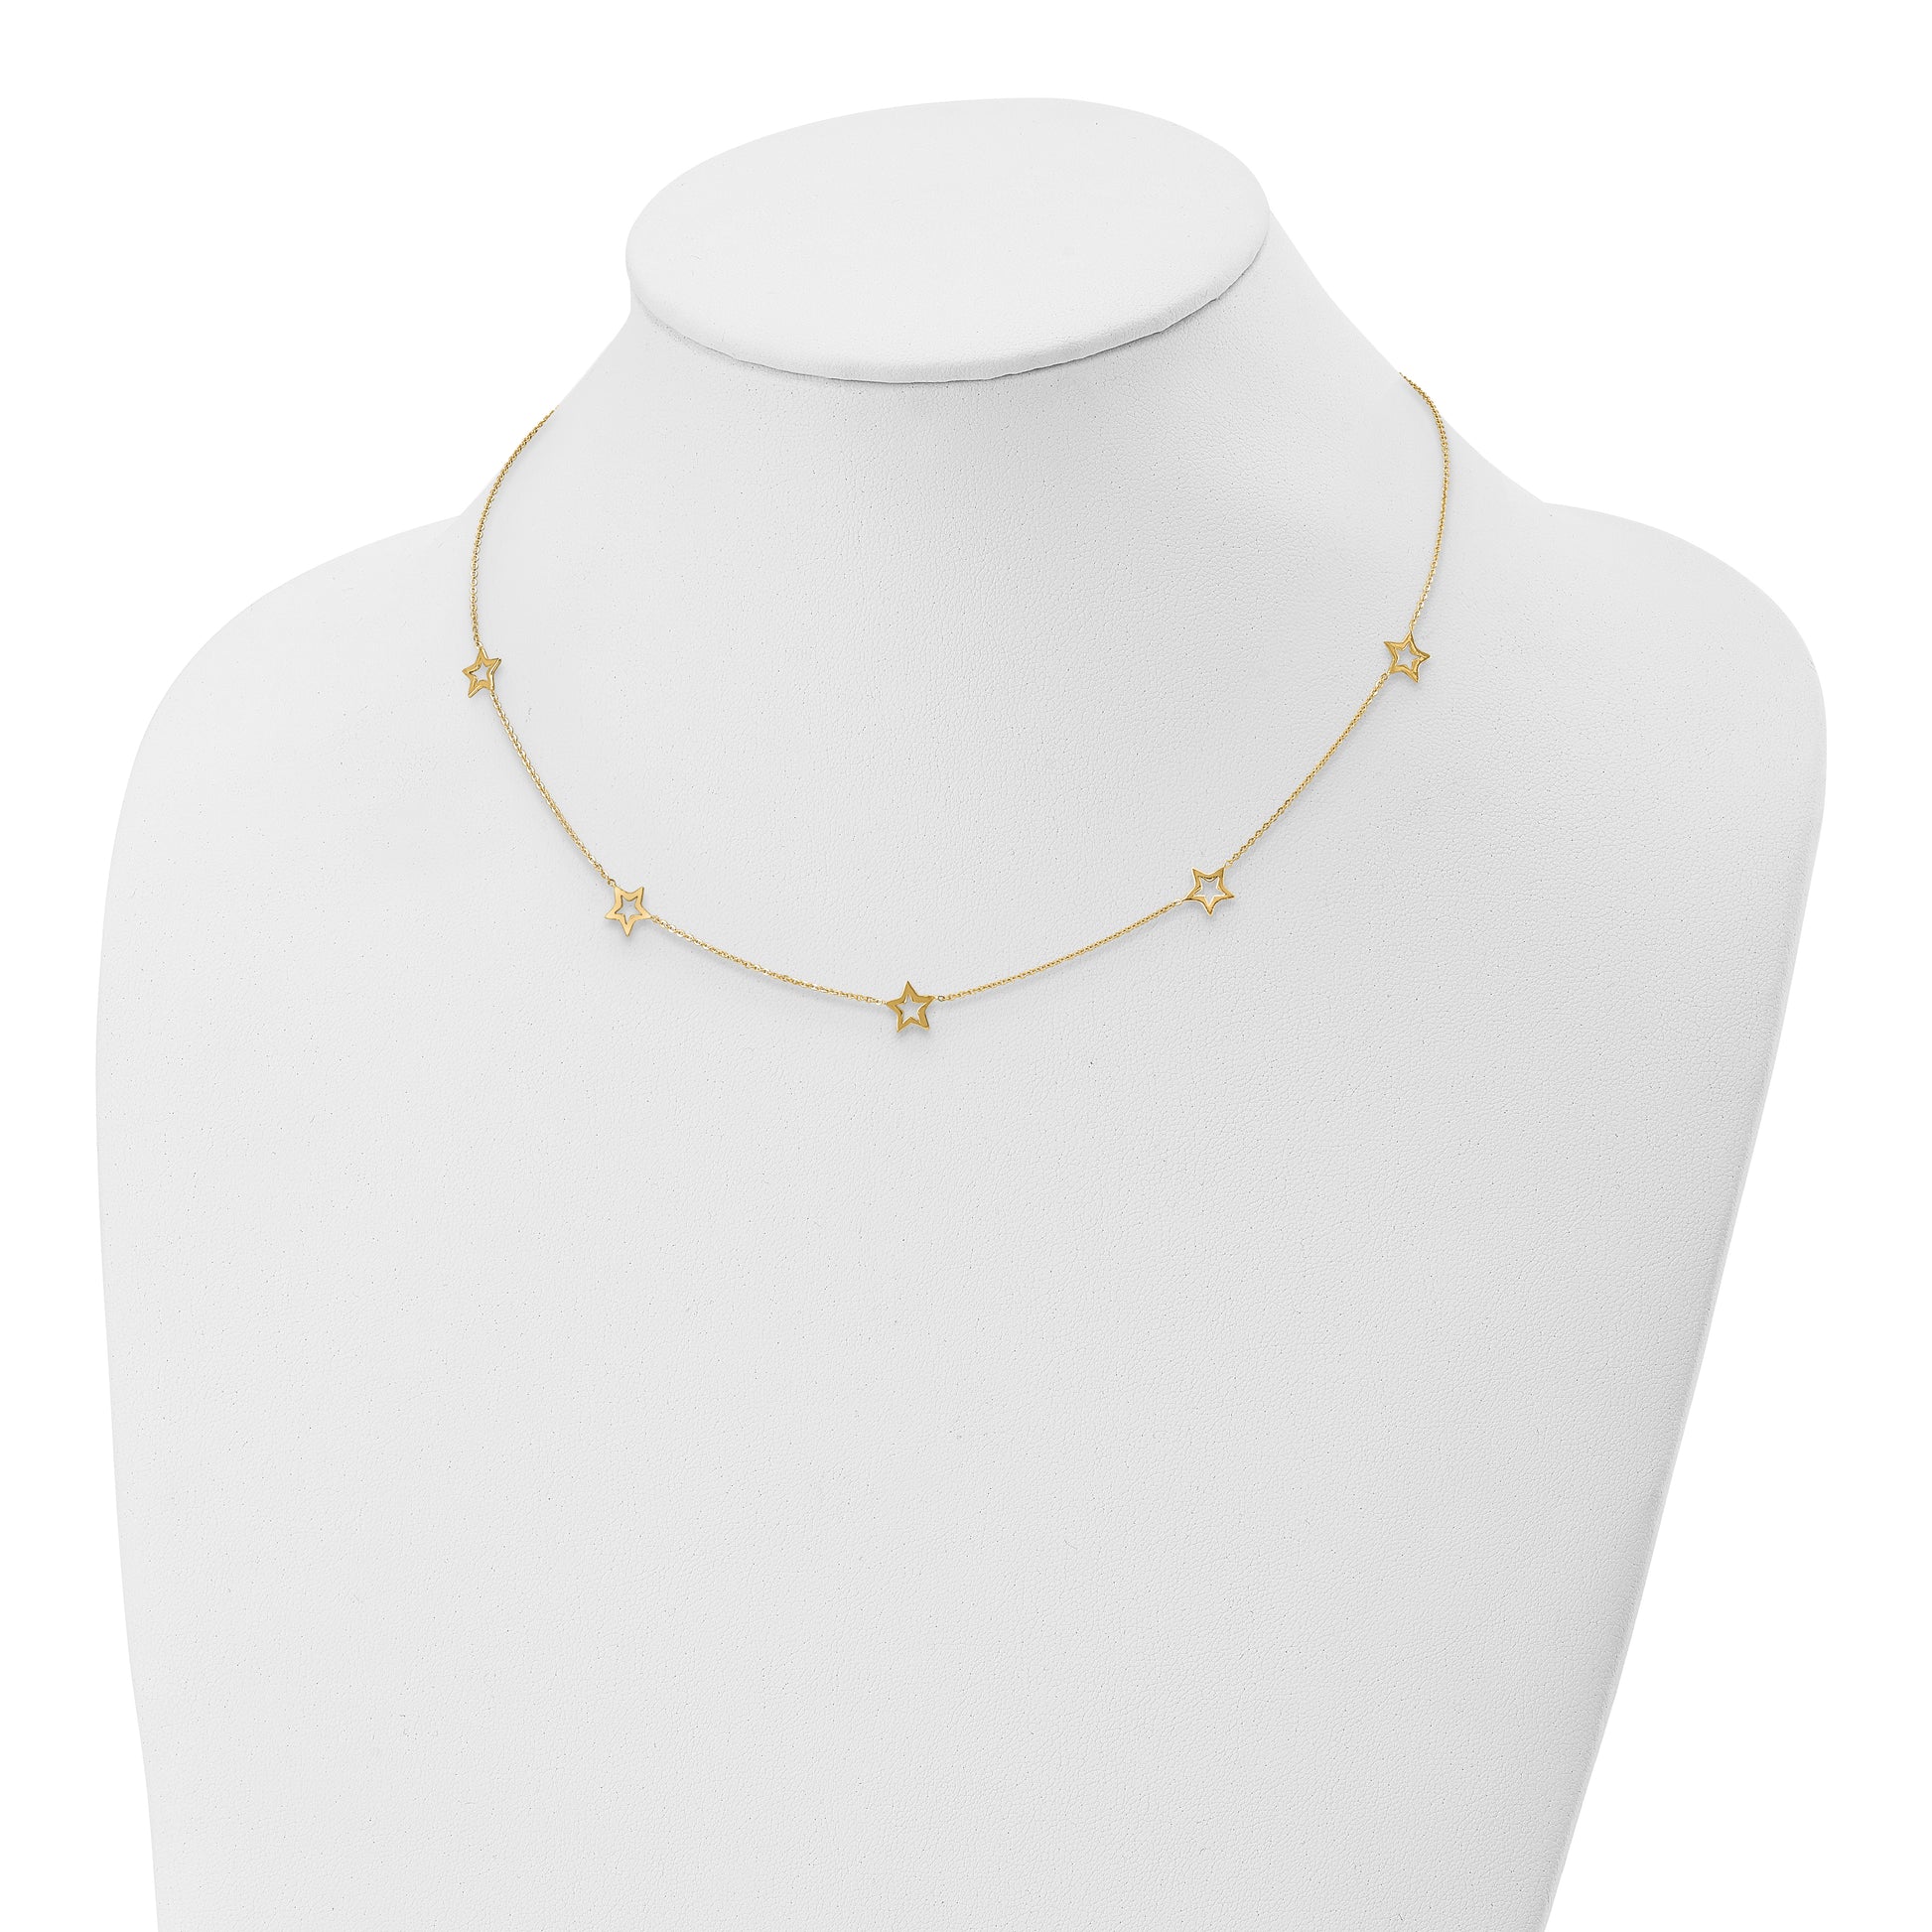 14K Yellow Gold Star w/2in Extension Necklace